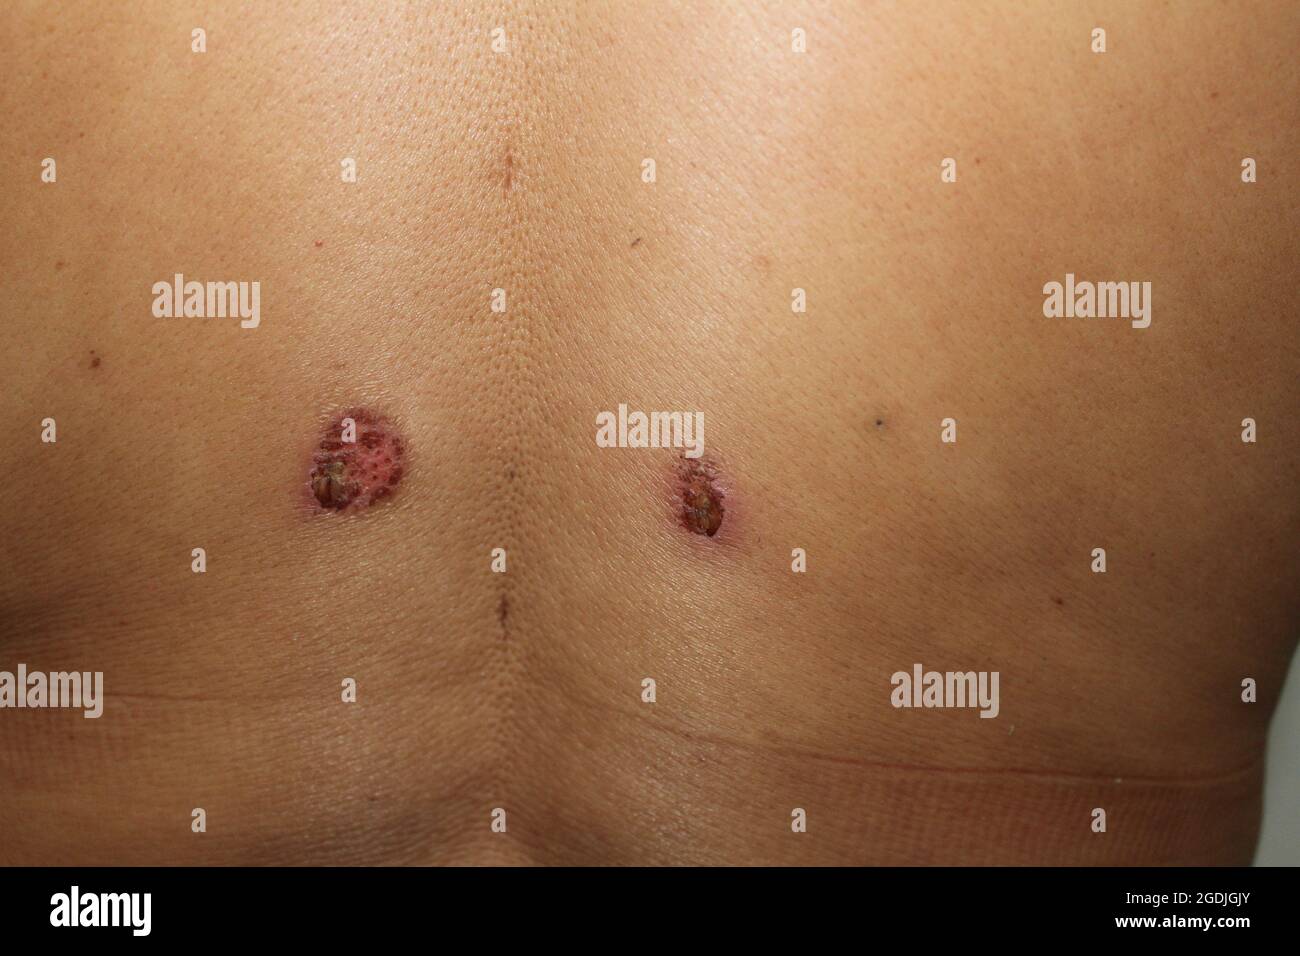 Two holes on a woman's upper back showing the liposuction or lipo entry points done during cosmetic surgery procedure Stock Photo